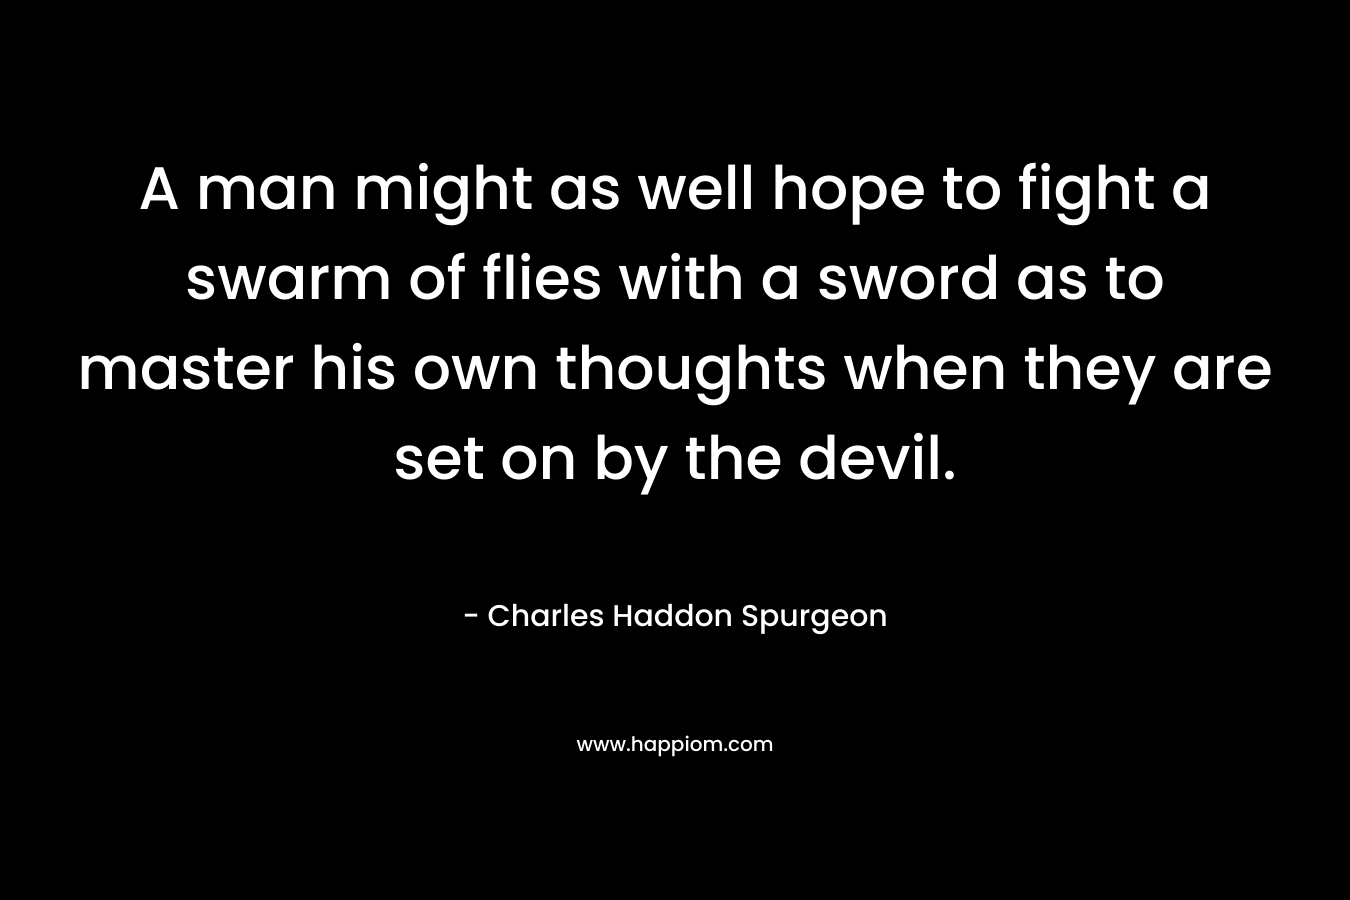 A man might as well hope to fight a swarm of flies with a sword as to master his own thoughts when they are set on by the devil.